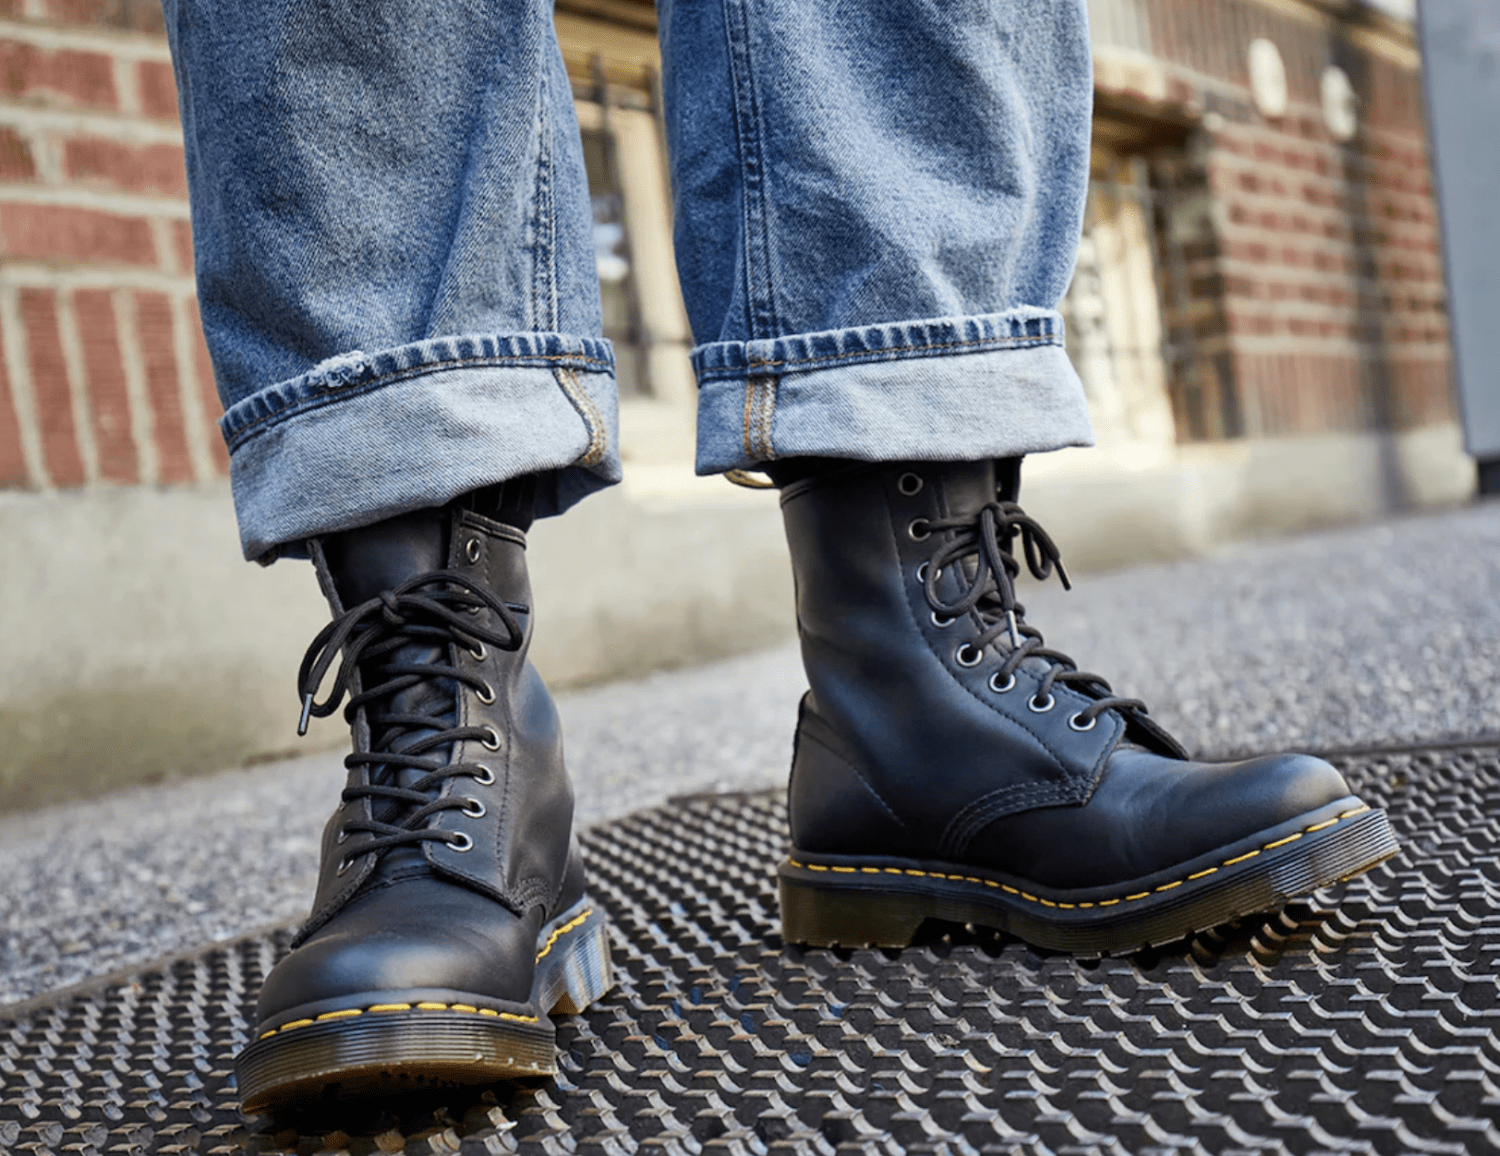 The 23 best winter boots for women in 2022 - TODAY